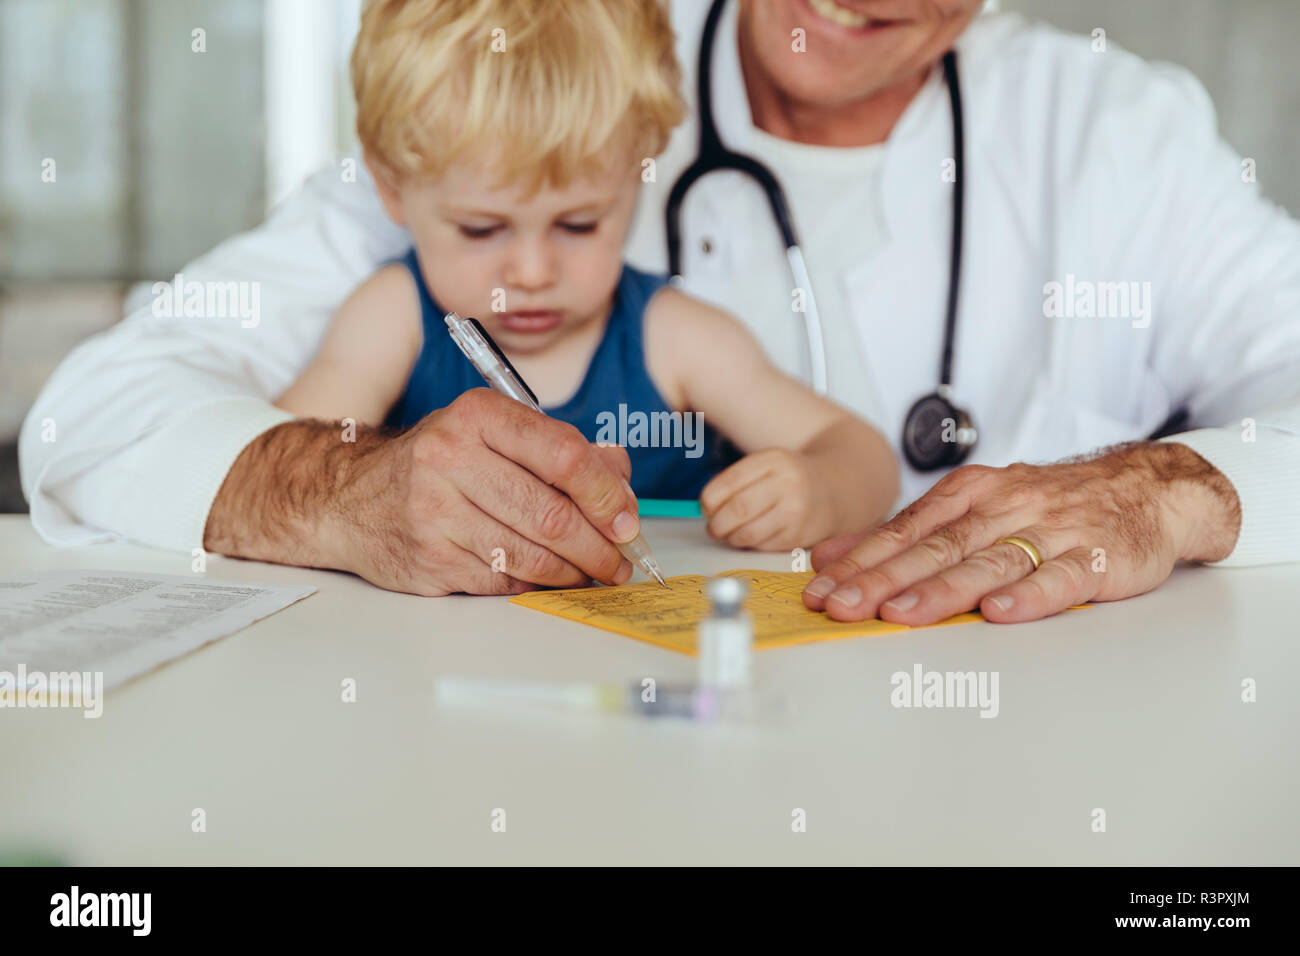 Toddler sitting on doctor's lap, while filling in immunization card Stock Photo